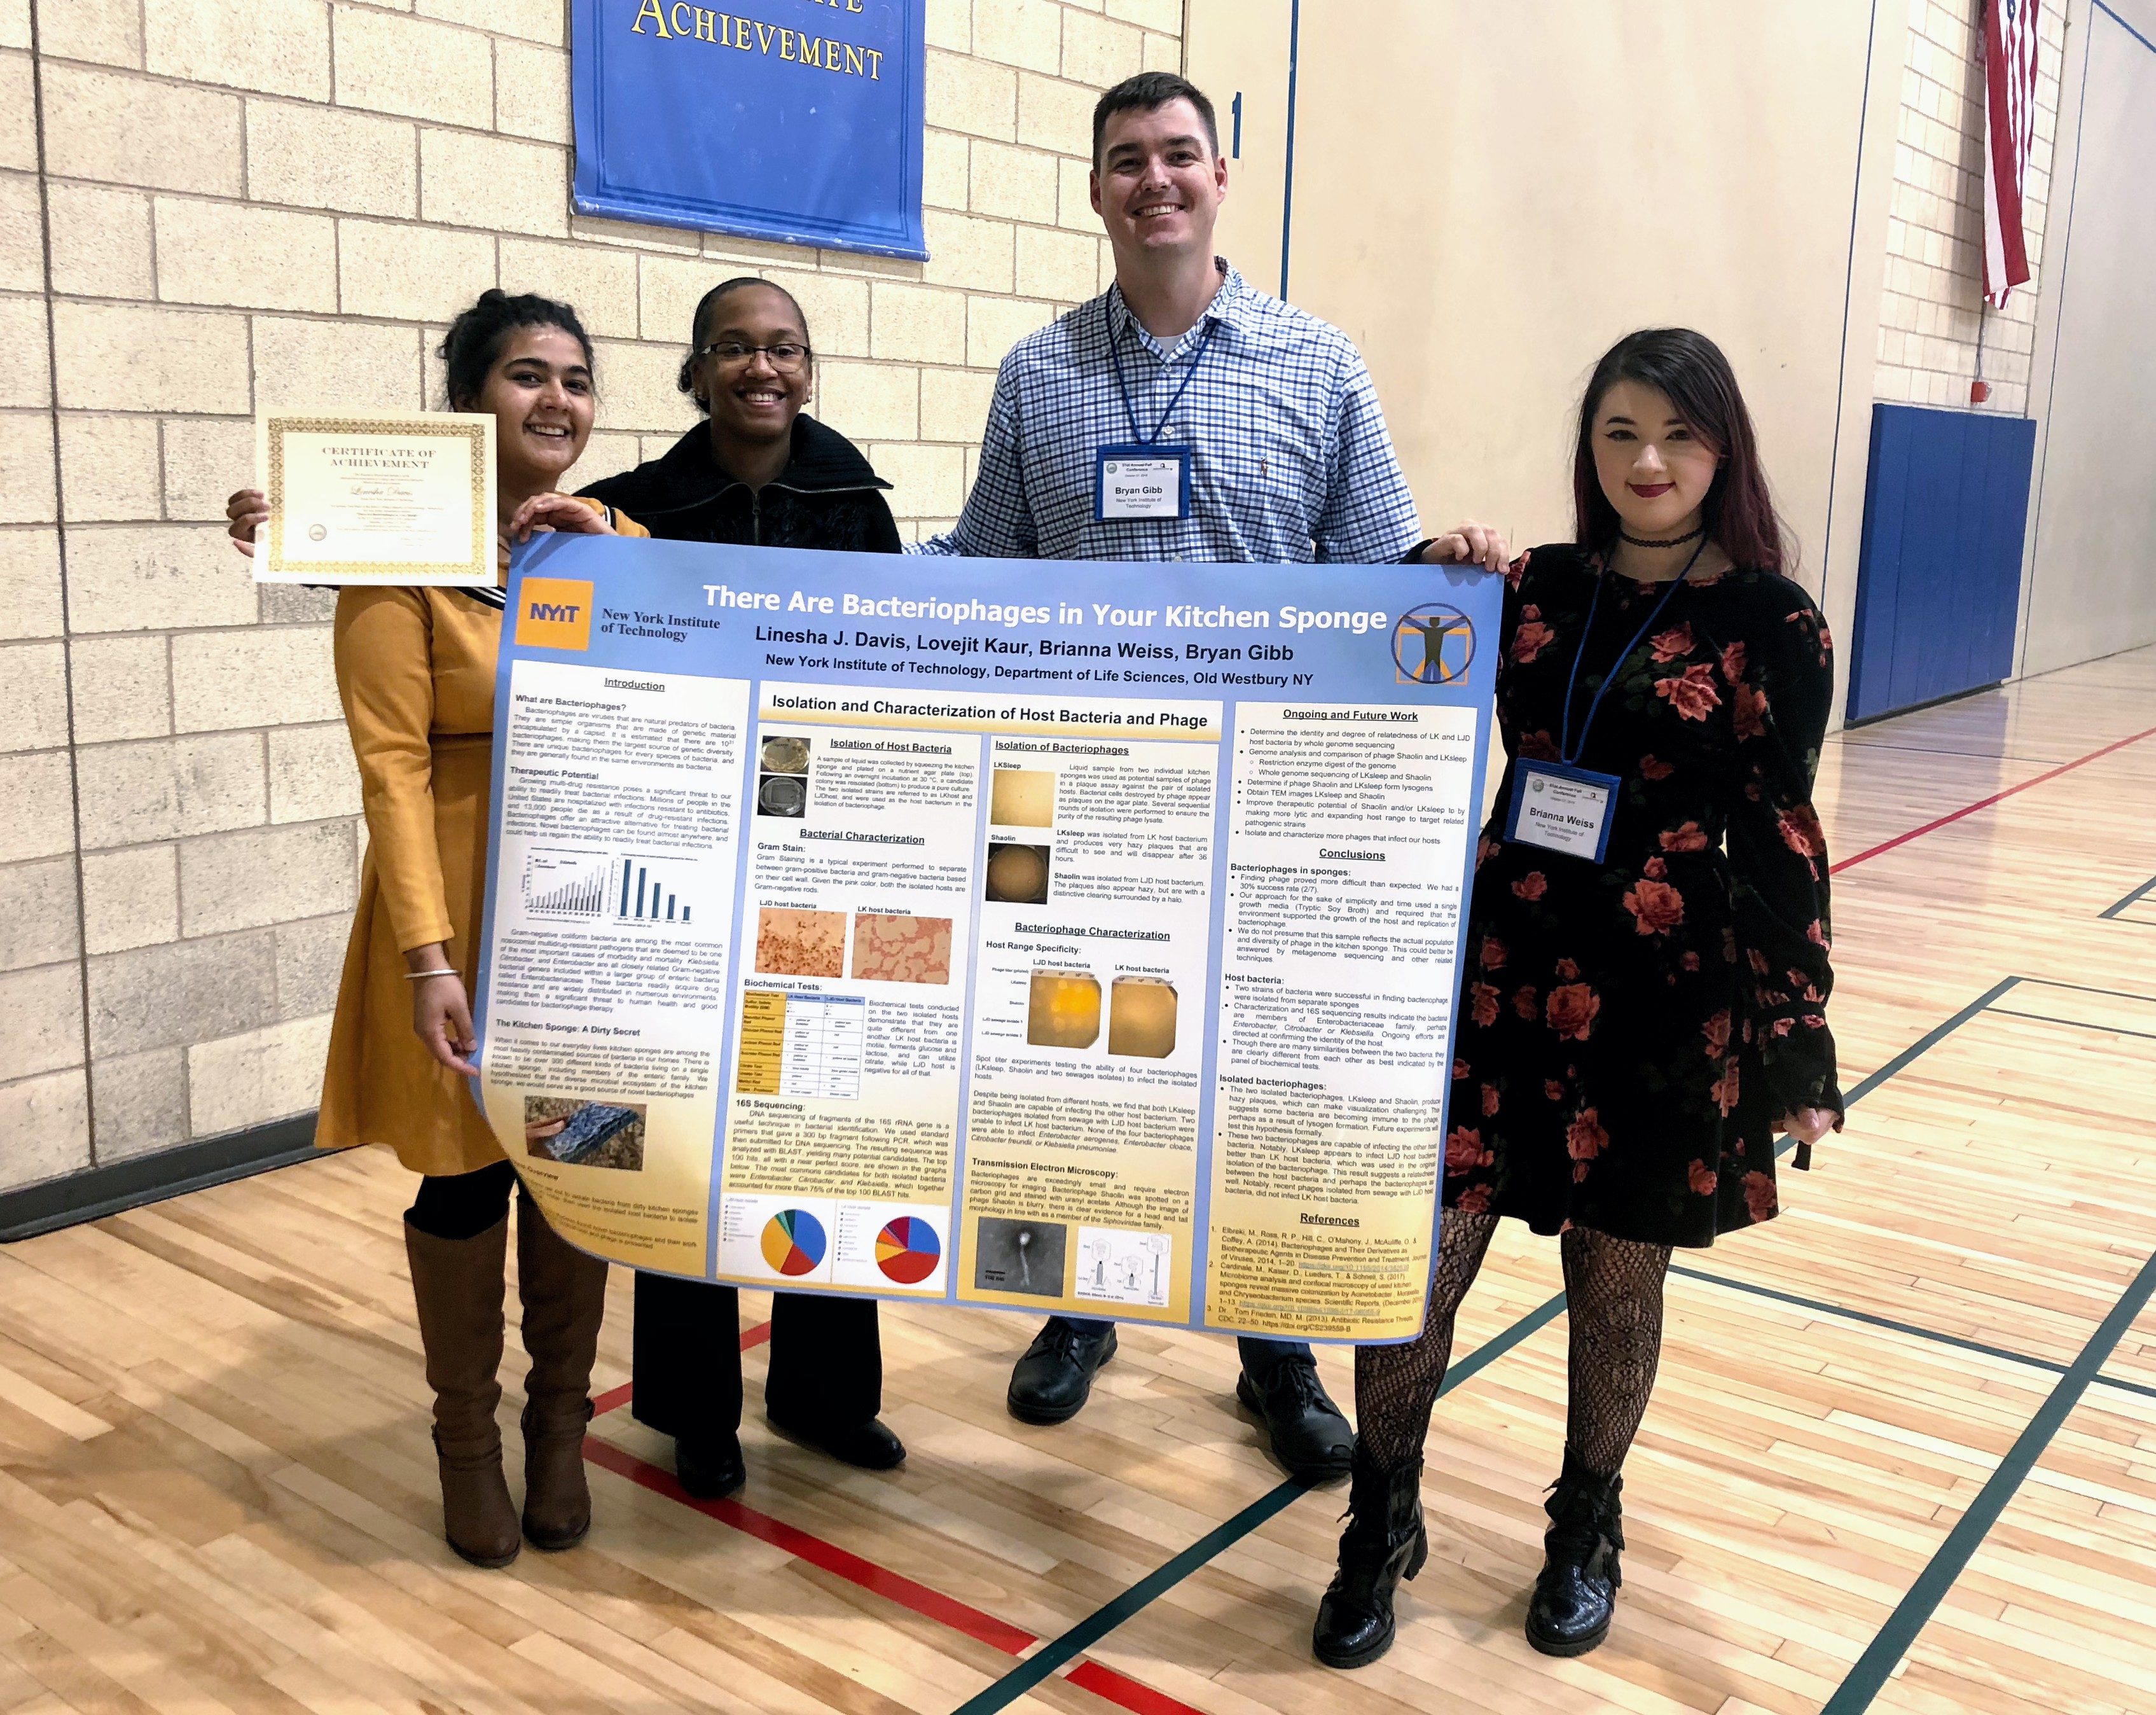 Life Science students, Lovejit Kaur, Linesha Davis and Brianna Weiss with mentor Bryan Gibb, which took first place for their work on bacteriophages in kitchen sponges.